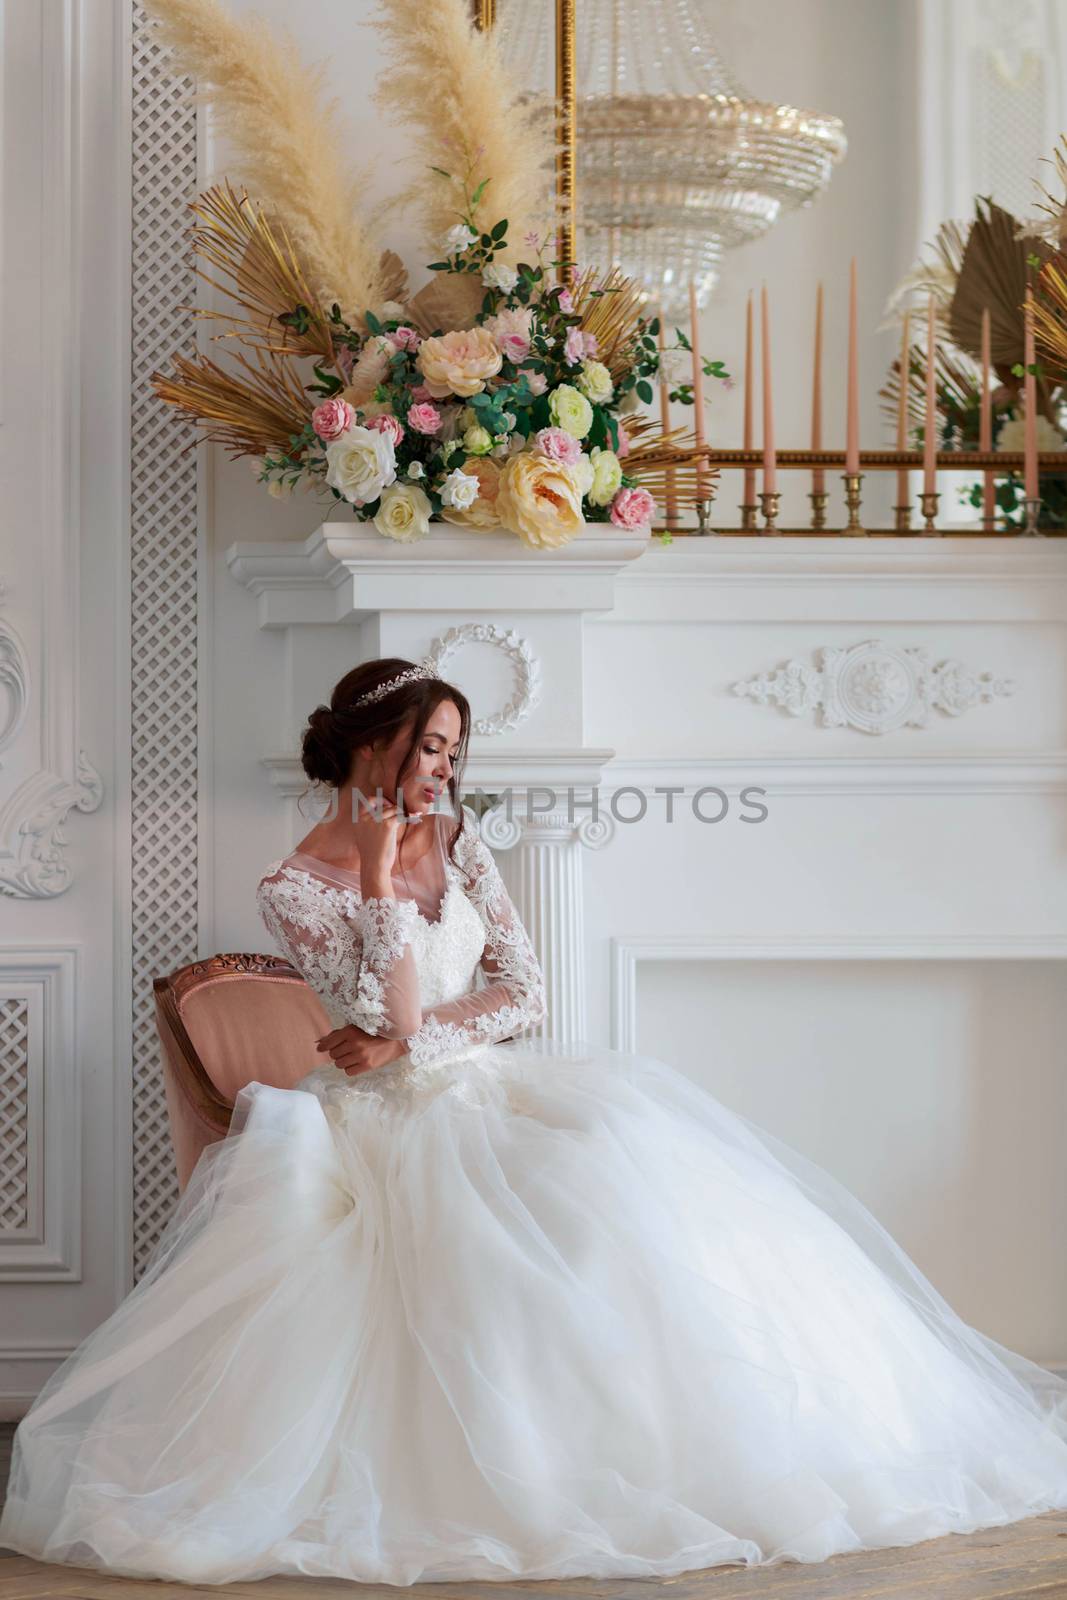 The bride in a white wedding dress sits thoughtfully in a chair waiting for the groom.